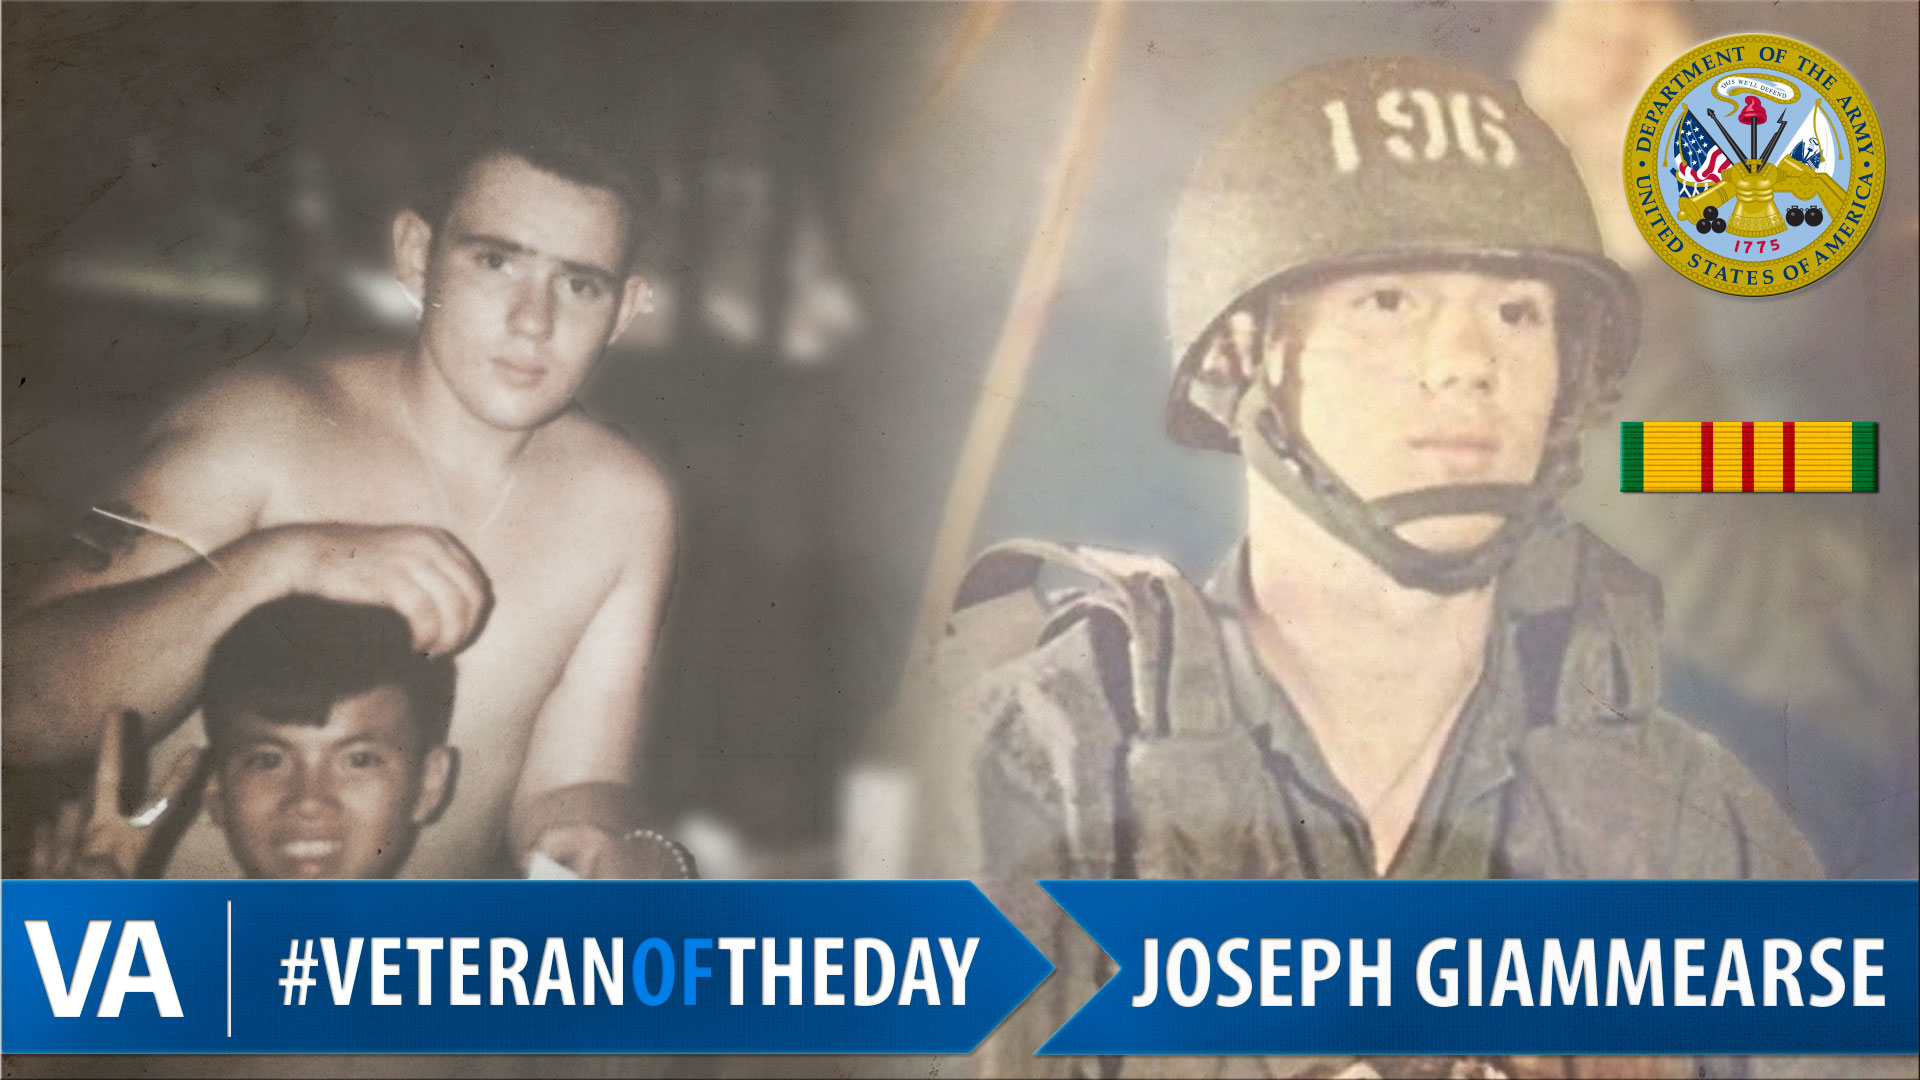 Joseph Giammearse - Veteran of the Day